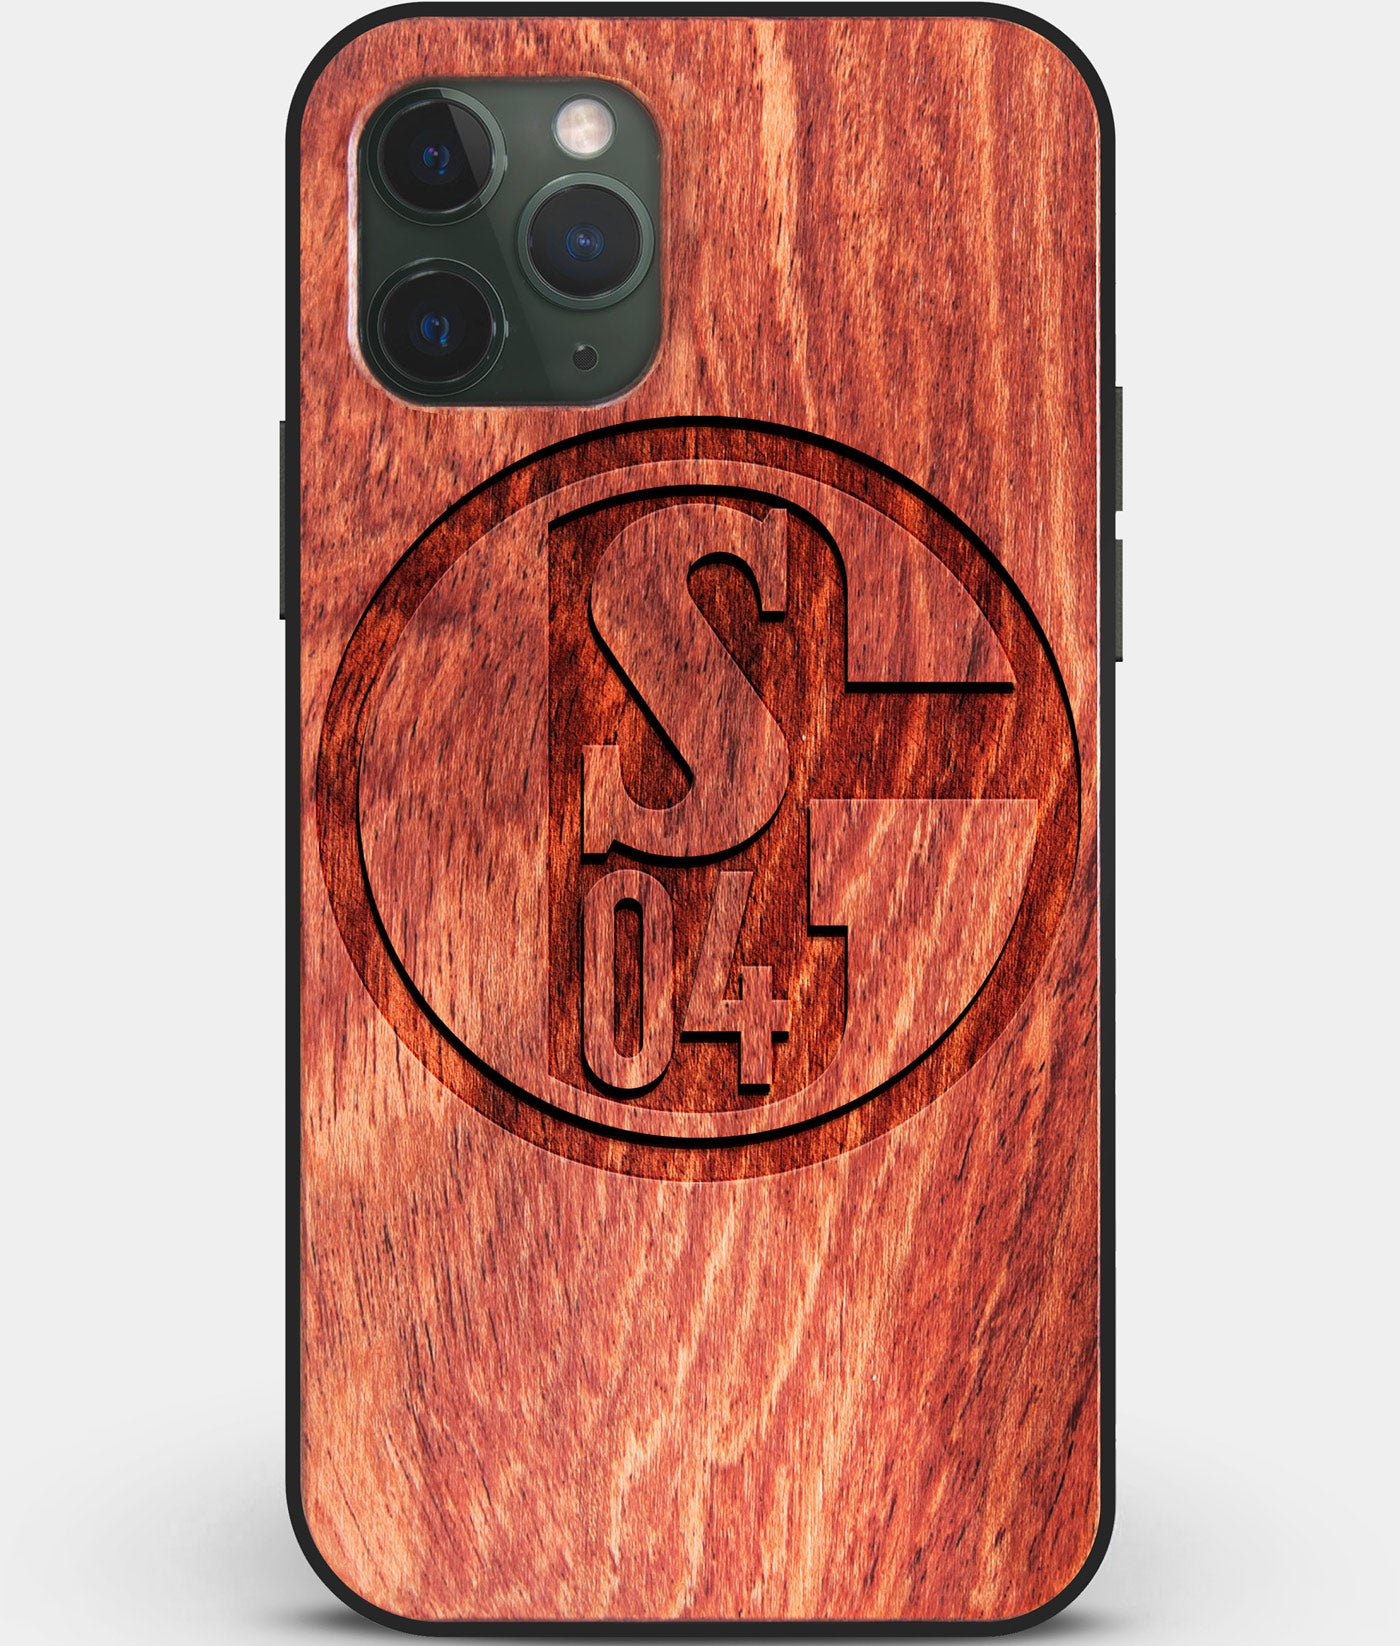 Custom Carved Wood FC Schalke 04 iPhone 11 Pro Max Case | Personalized Mahogany Wood FC Schalke 04 Cover, Birthday Gift, Gifts For Him, Monogrammed Gift For Fan | by Engraved In Nature